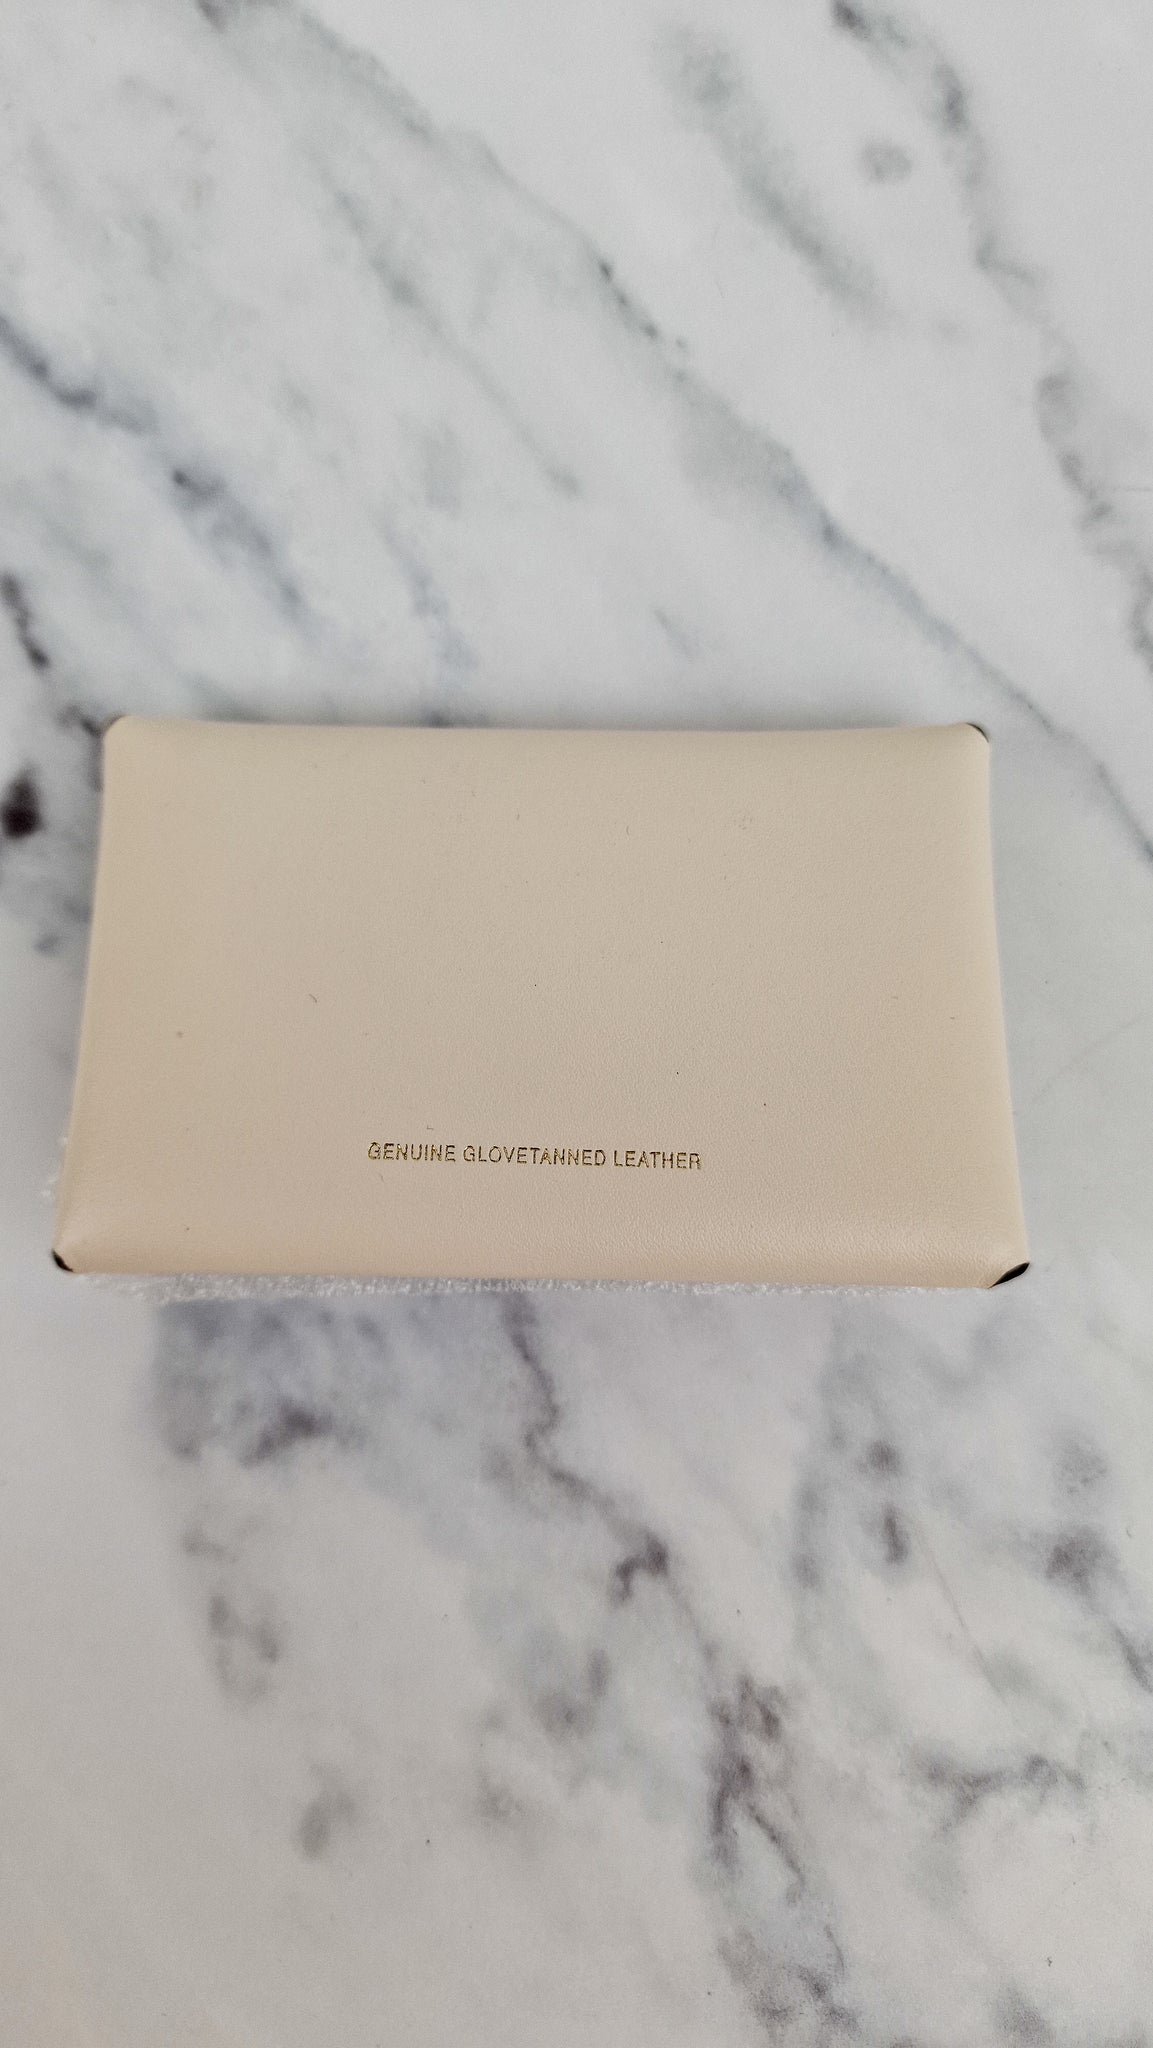 Coach Card Case with C Turnlock in Chalk Smooth Glovetanned